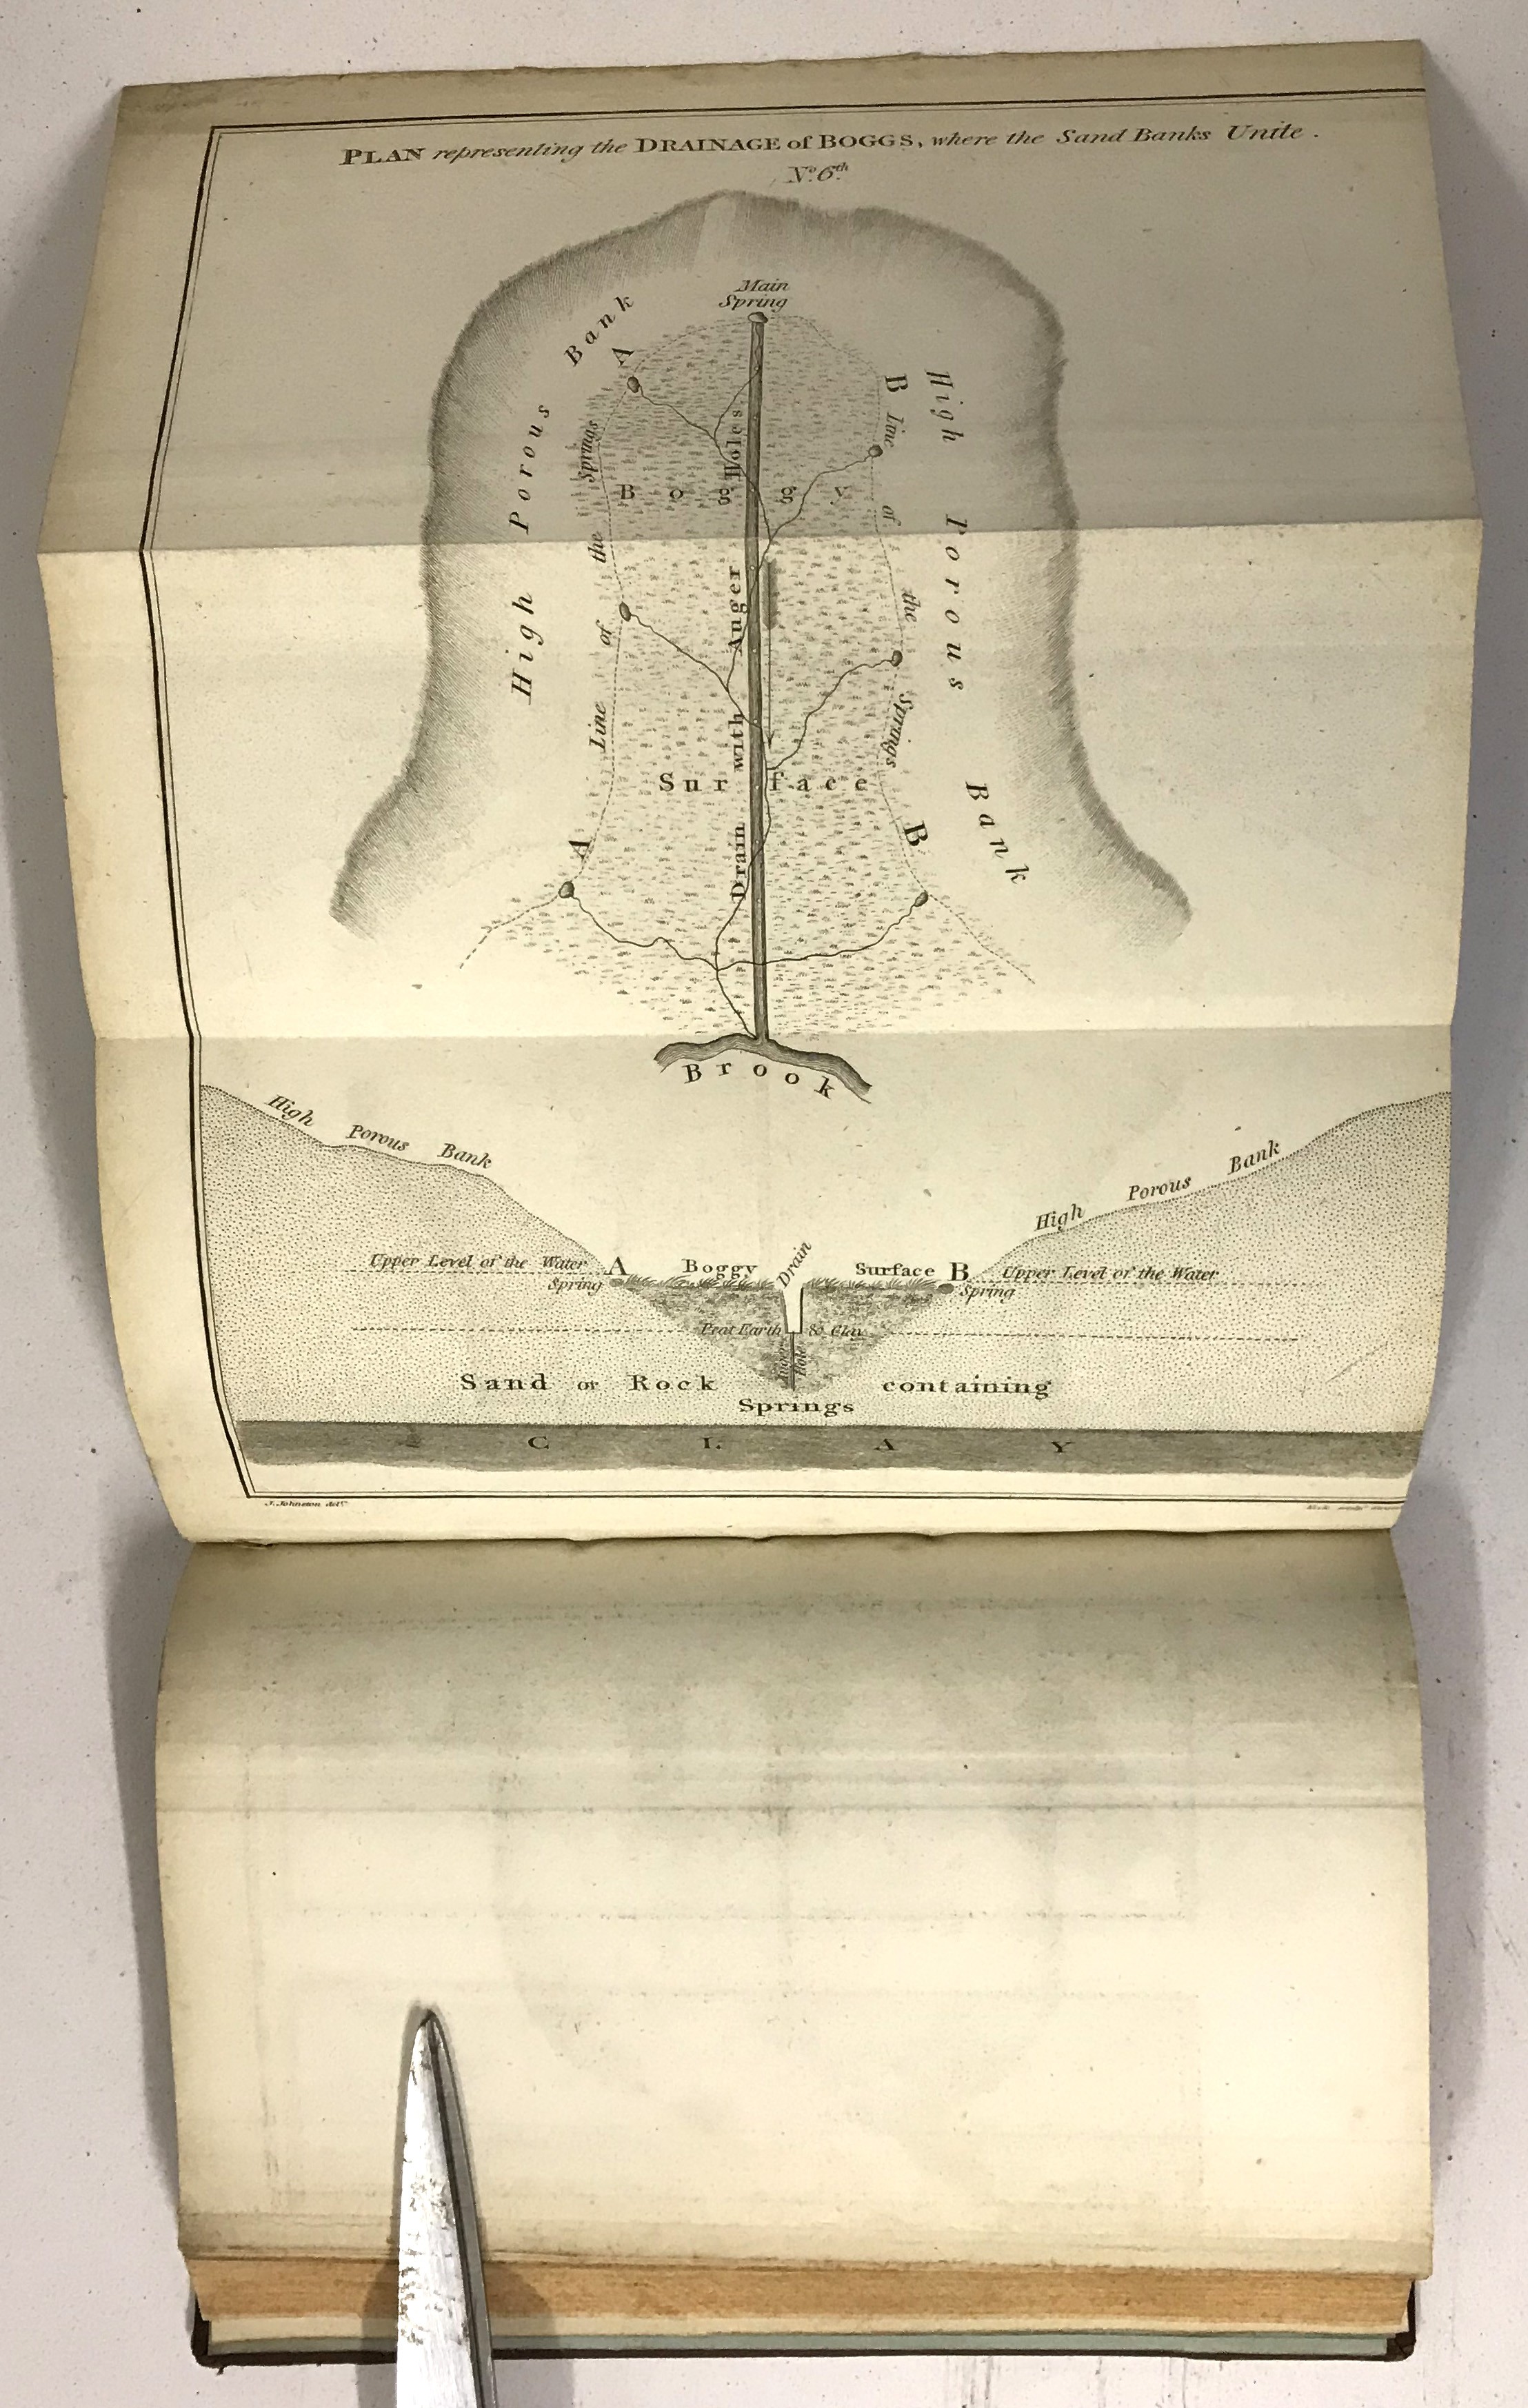 Book Land Drainage with Maps - Image 14 of 25